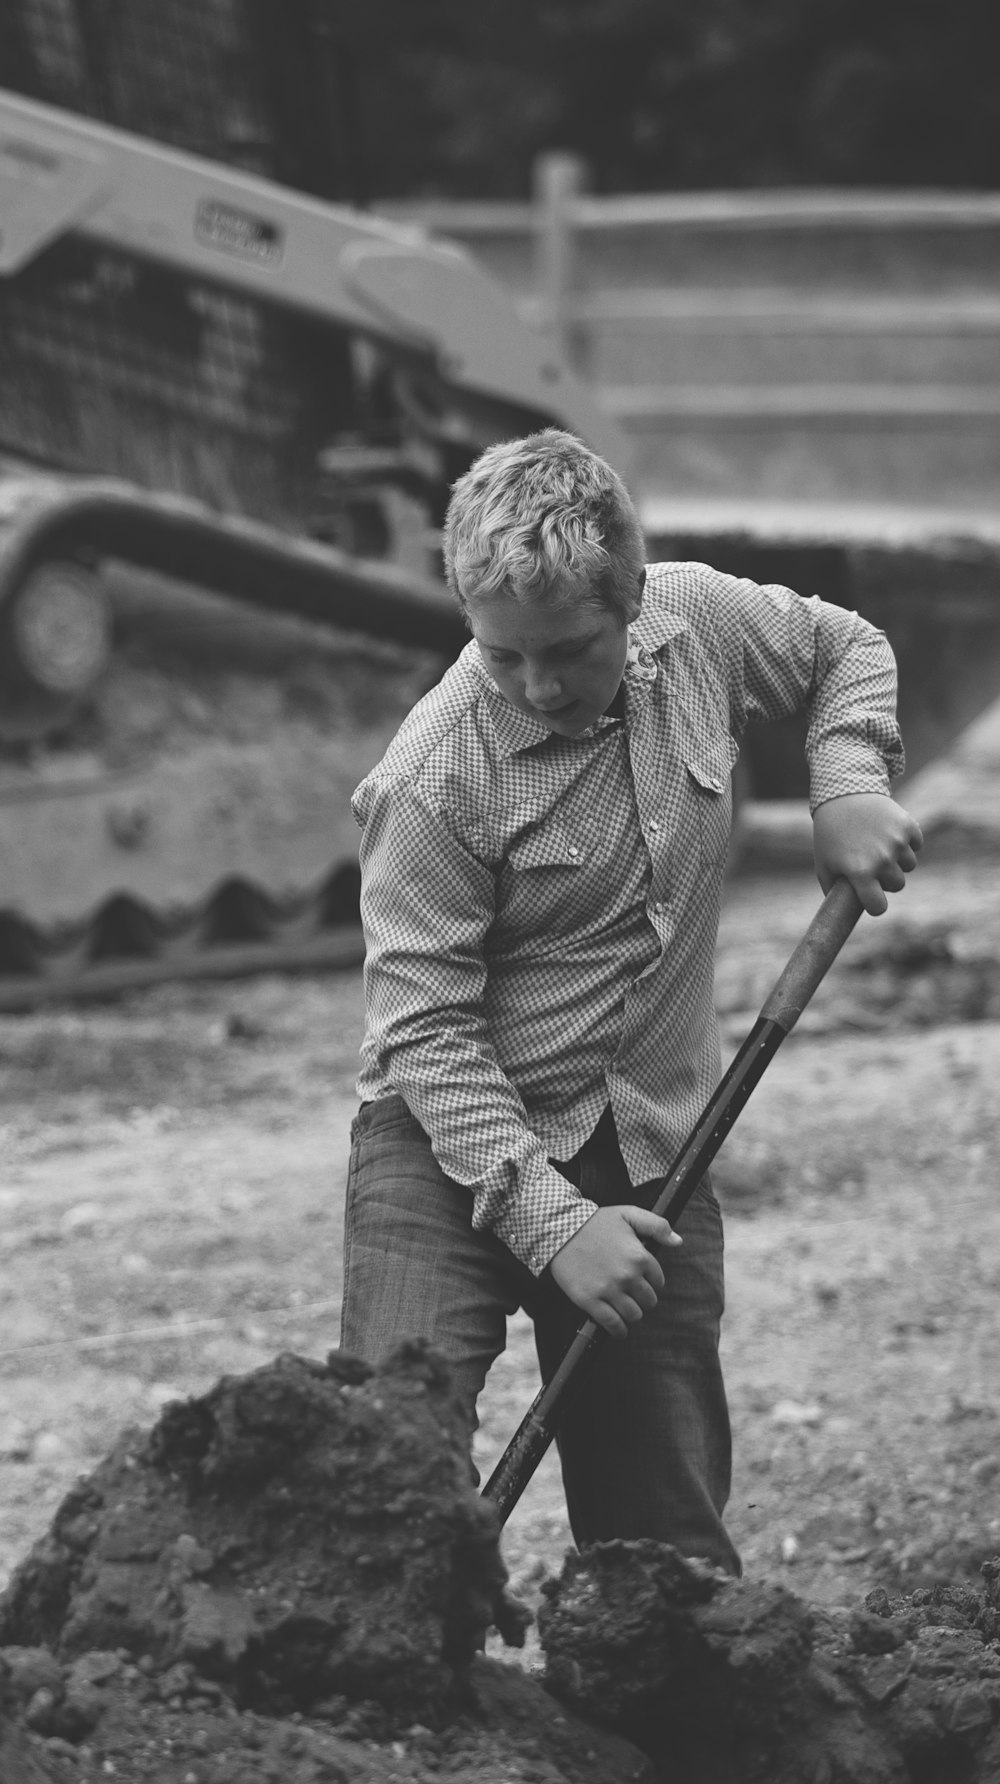 a young boy digging dirt with a shovel